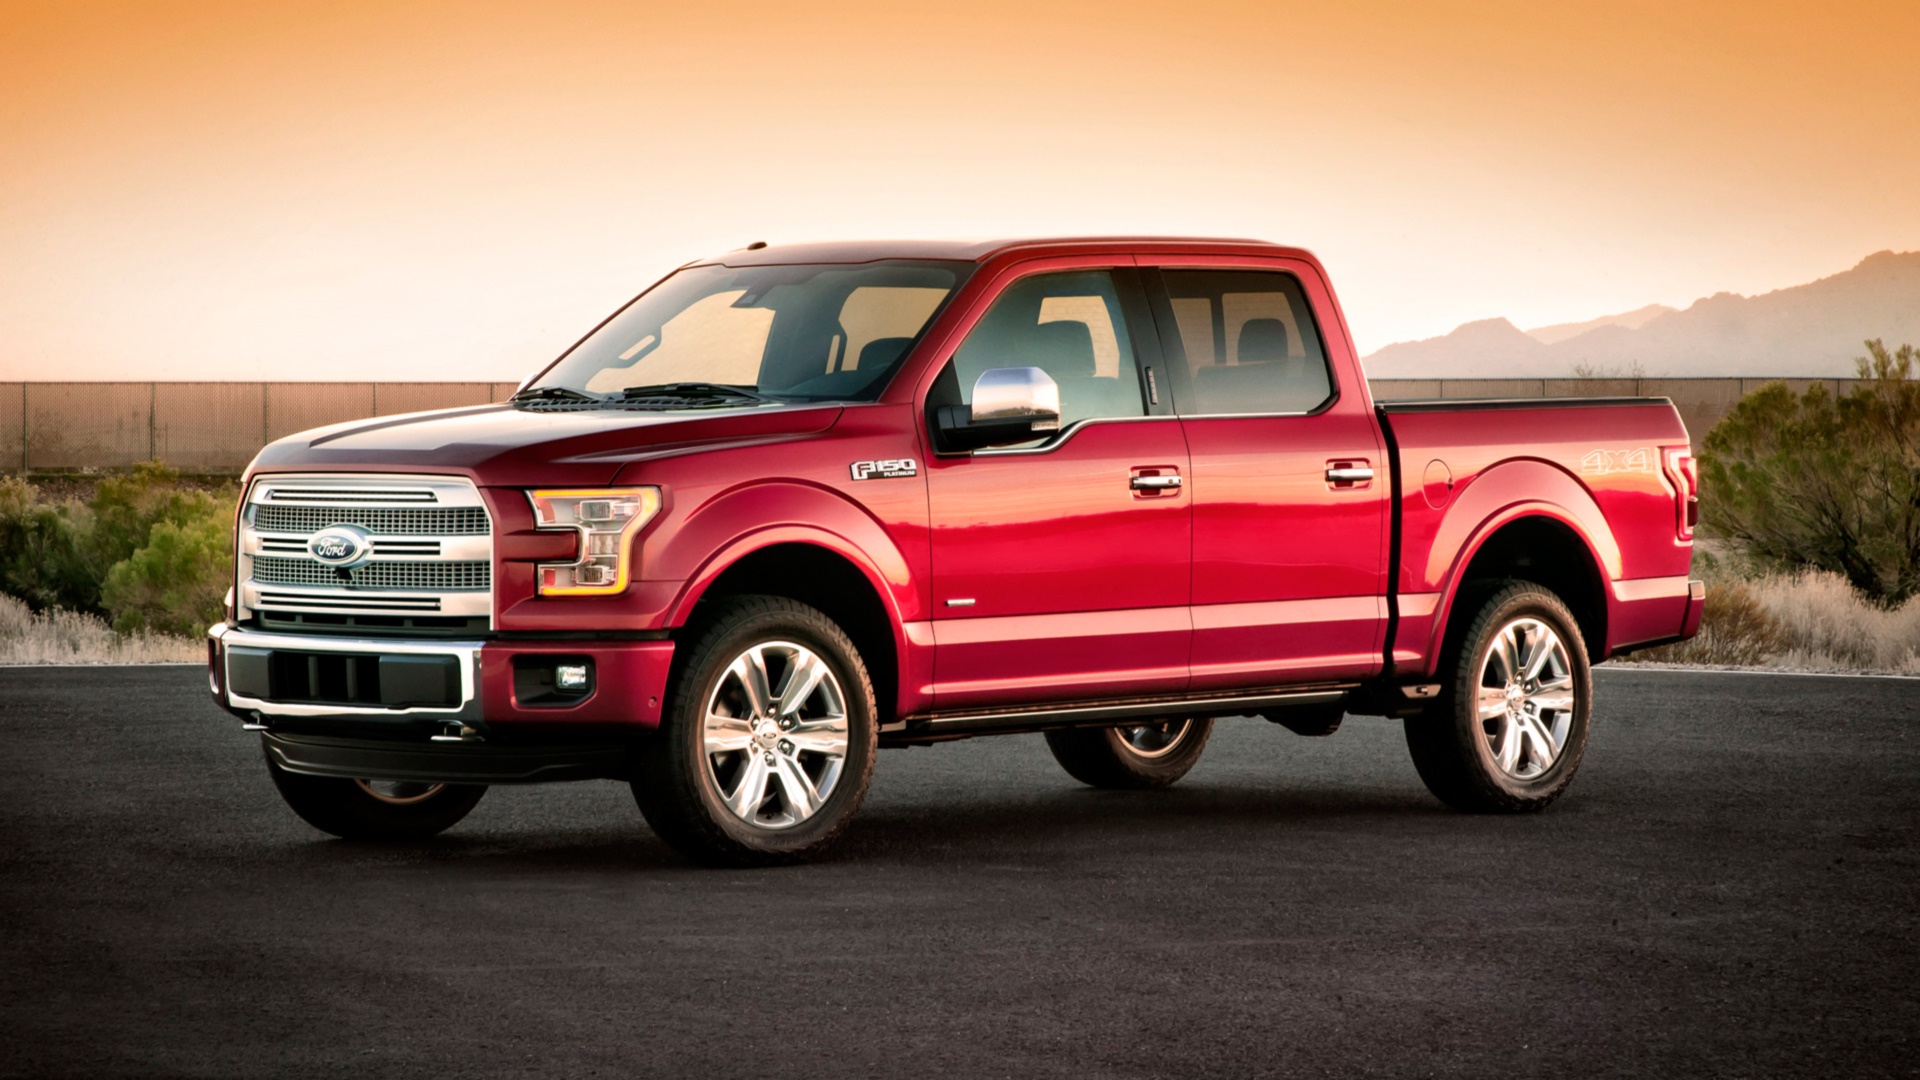 vehicles, 2015 ford f 150, ford